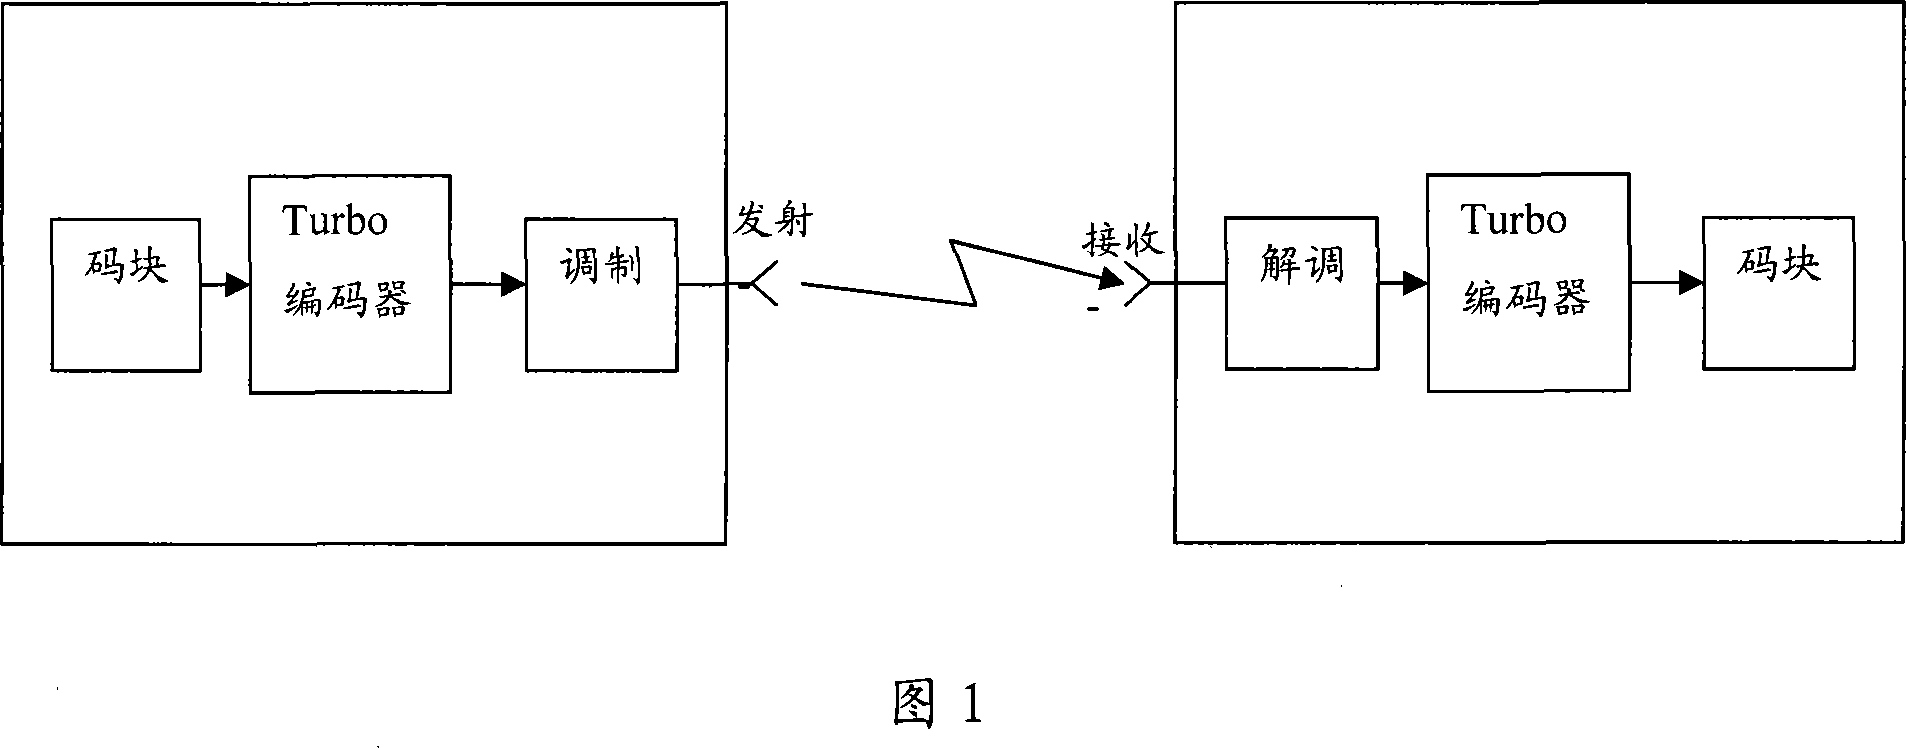 Method for generating turbo-code block intersection and HARQ packet